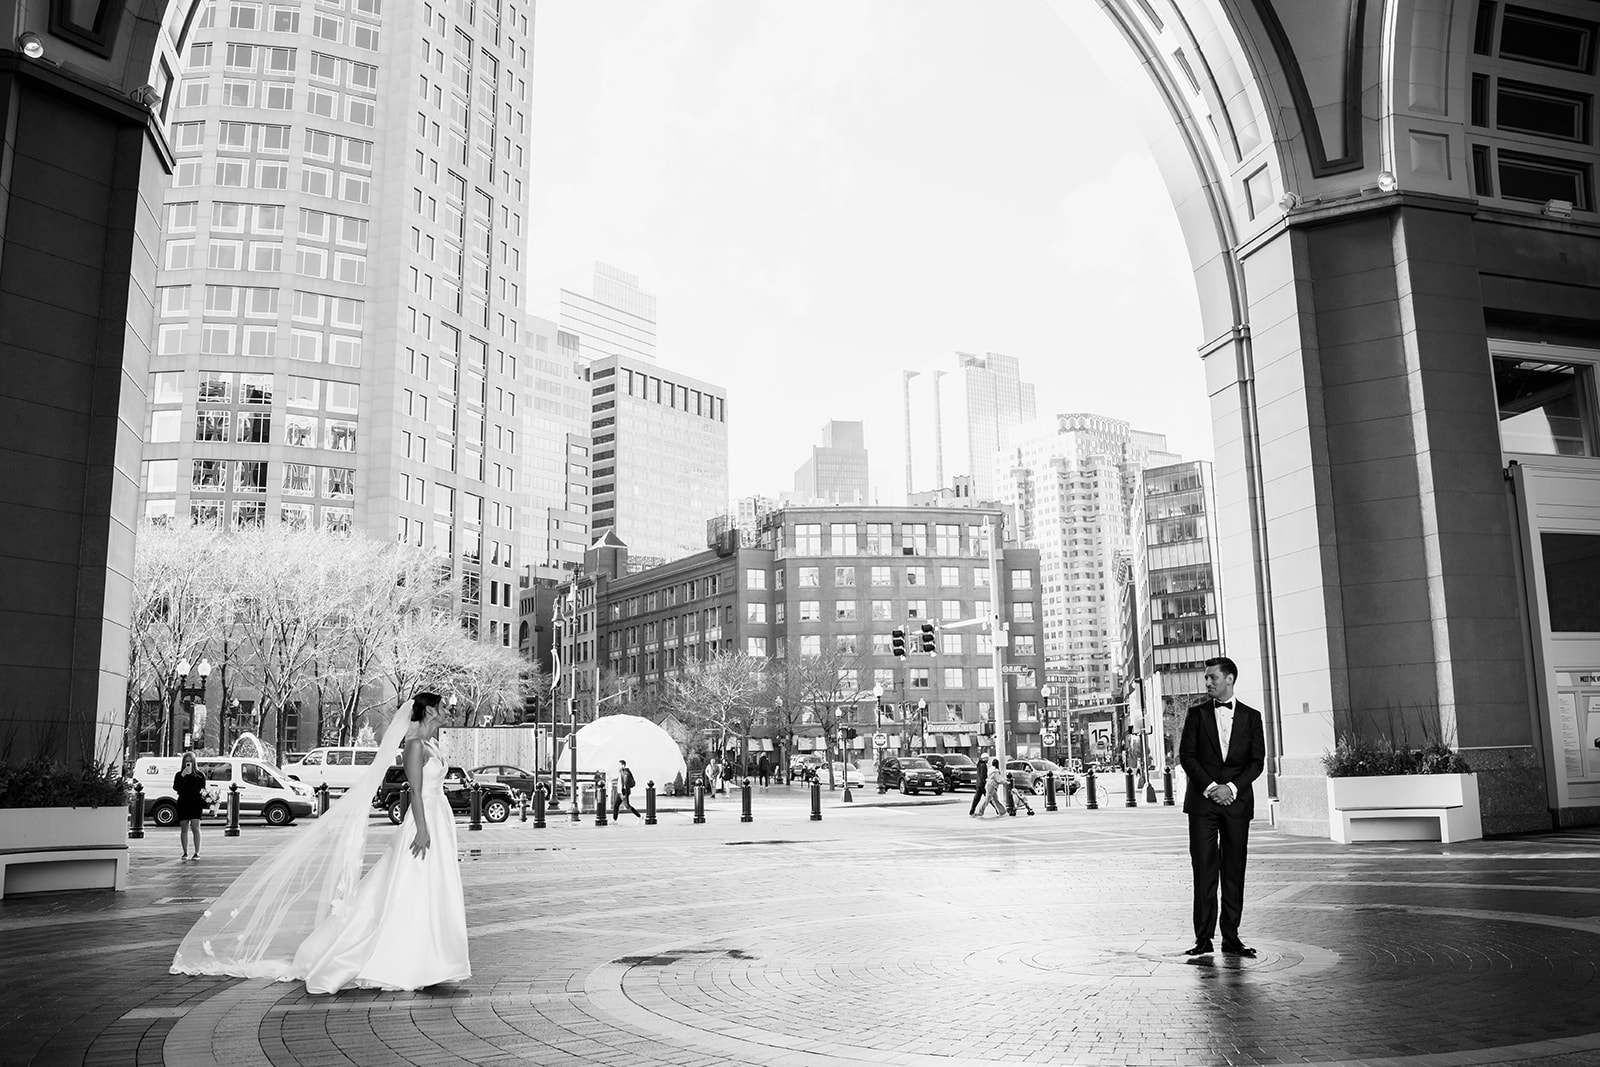 Bride and groom first look under the archway at Rowes Wharf. 